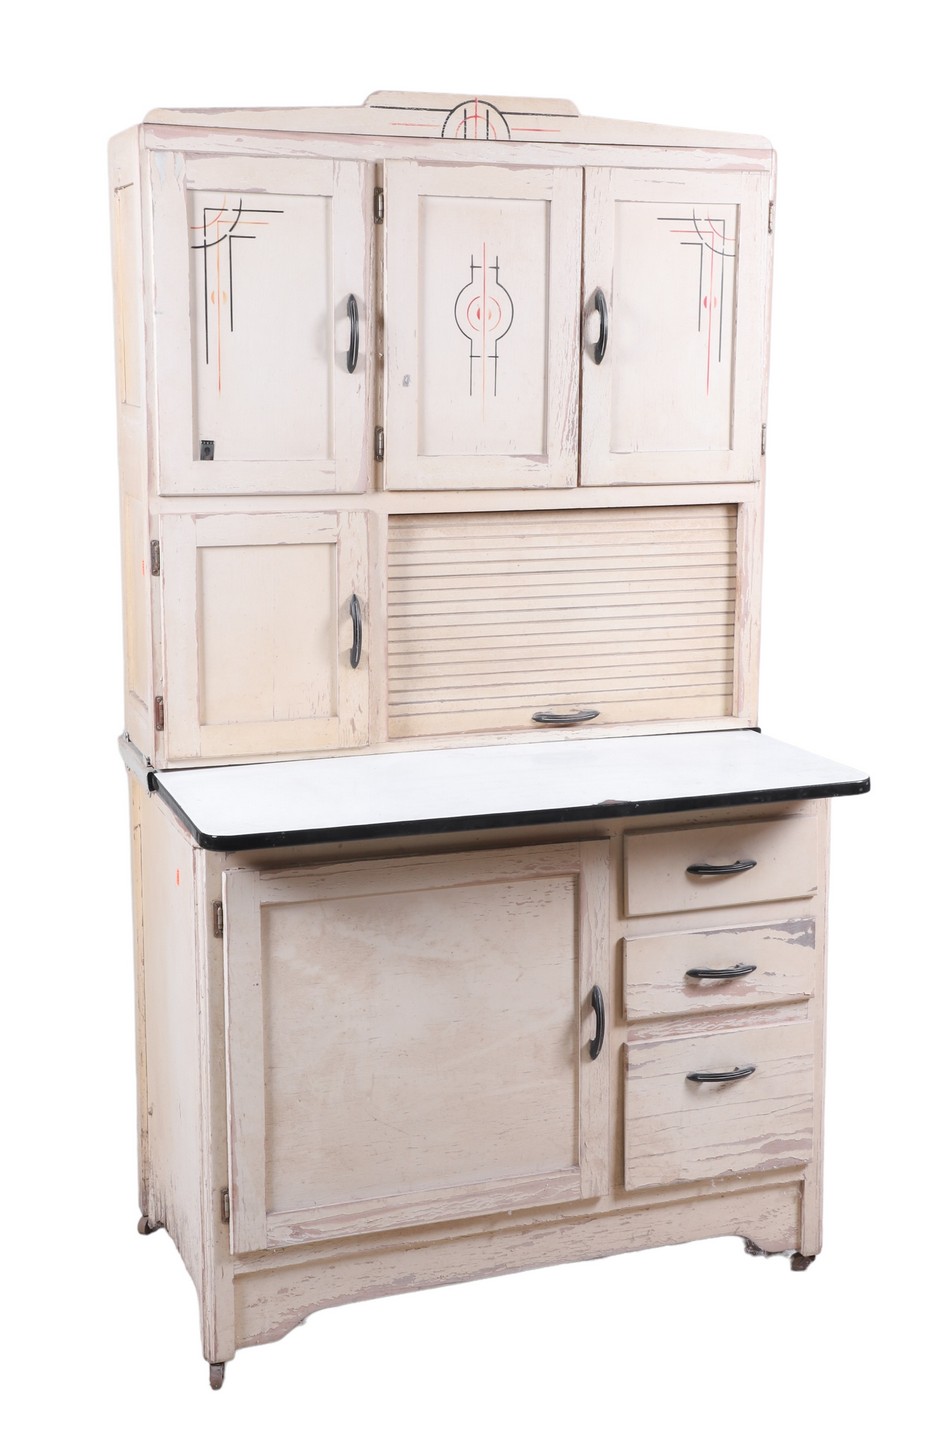 2 pc painted Kitchenette 3 doors 27a518